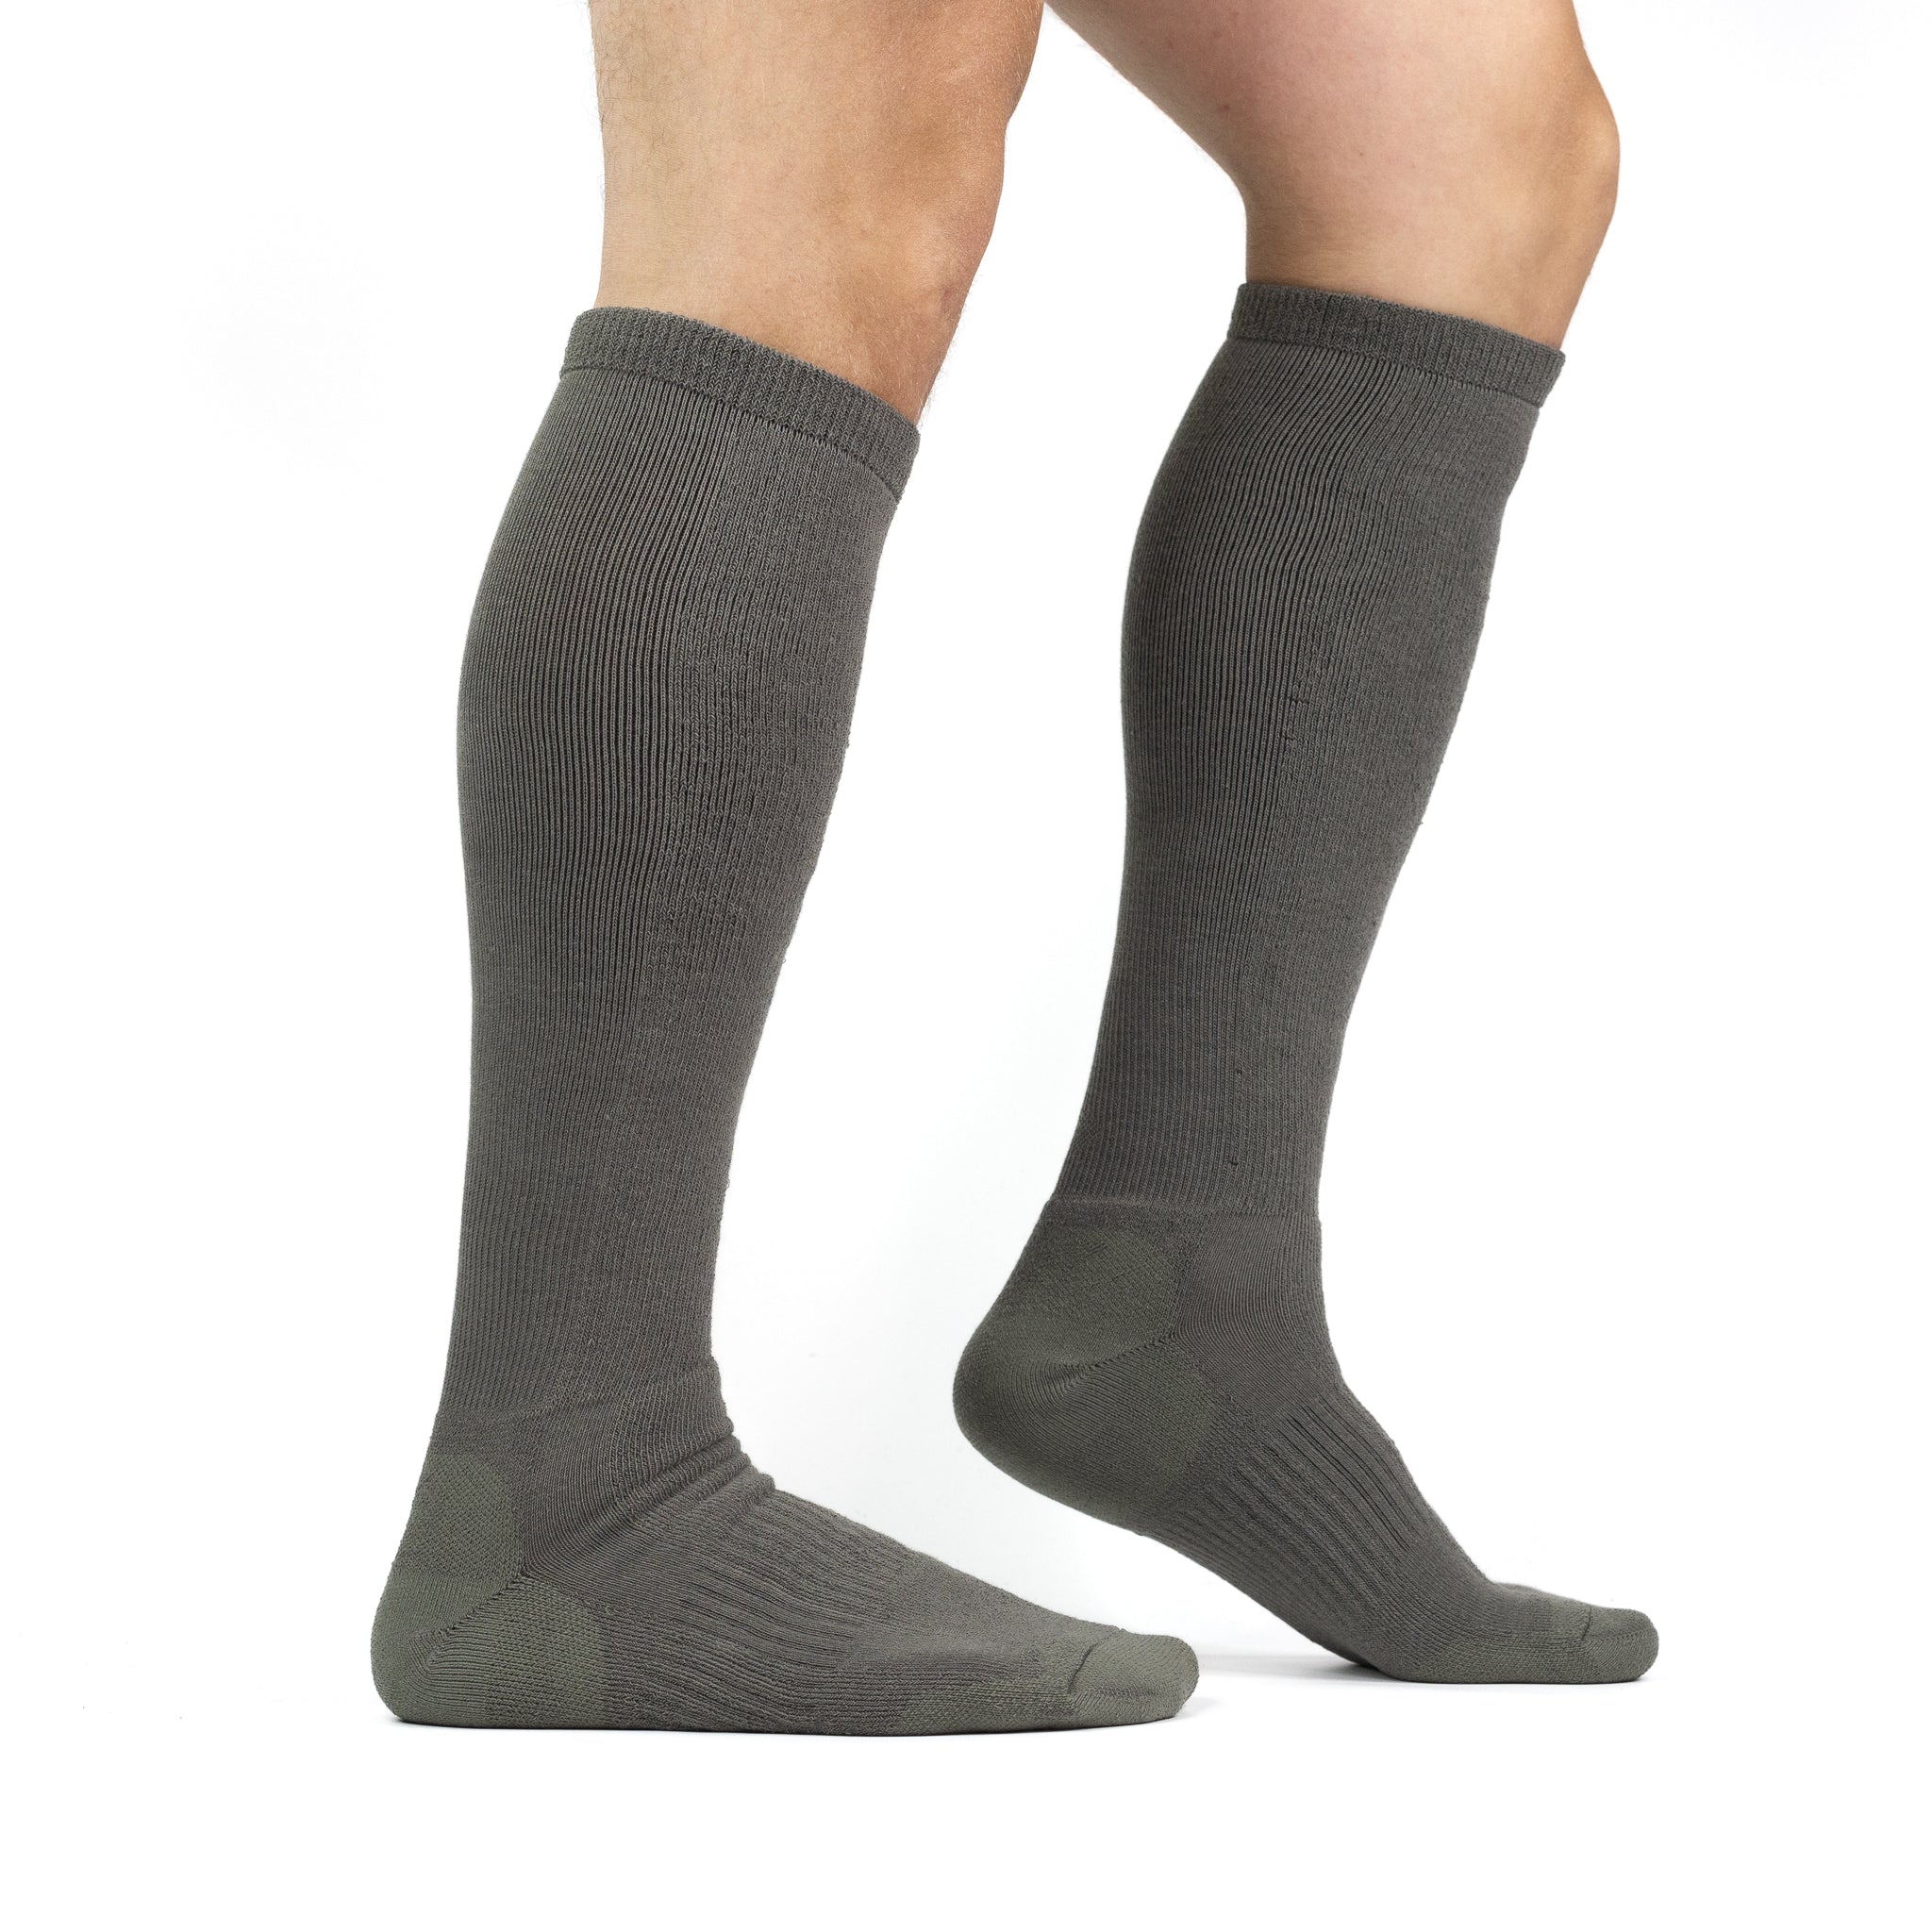 Fatigue Fighter Lightweight Over-the-Calf Military Sock - Fox River